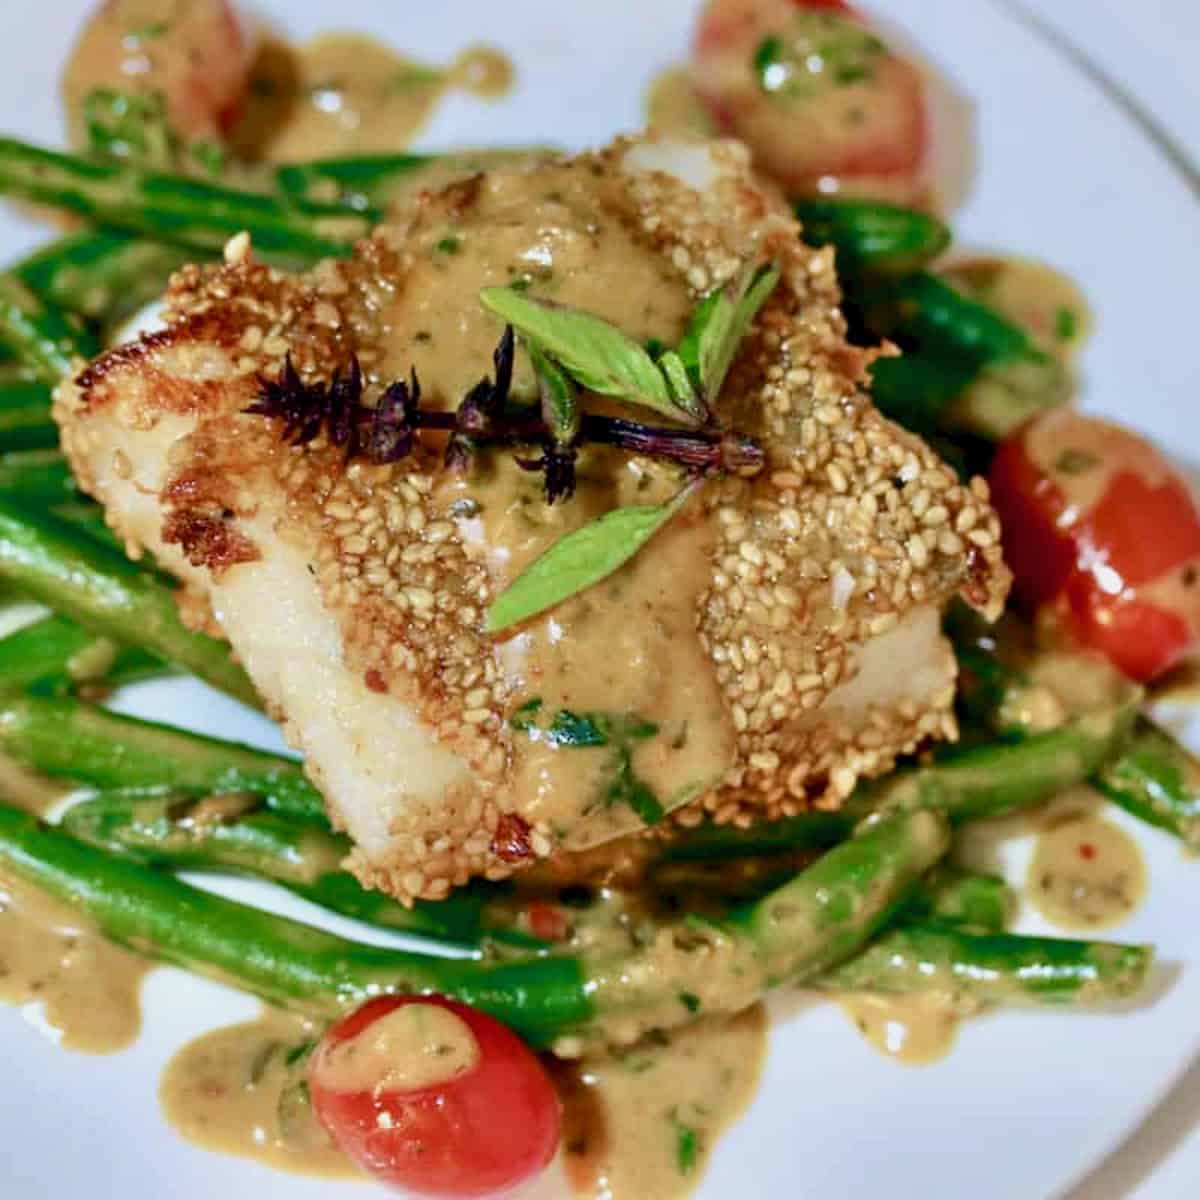 Roasted sesame cod on a plate with green beans, cherry tomatoes and lemon grass basil sauce.